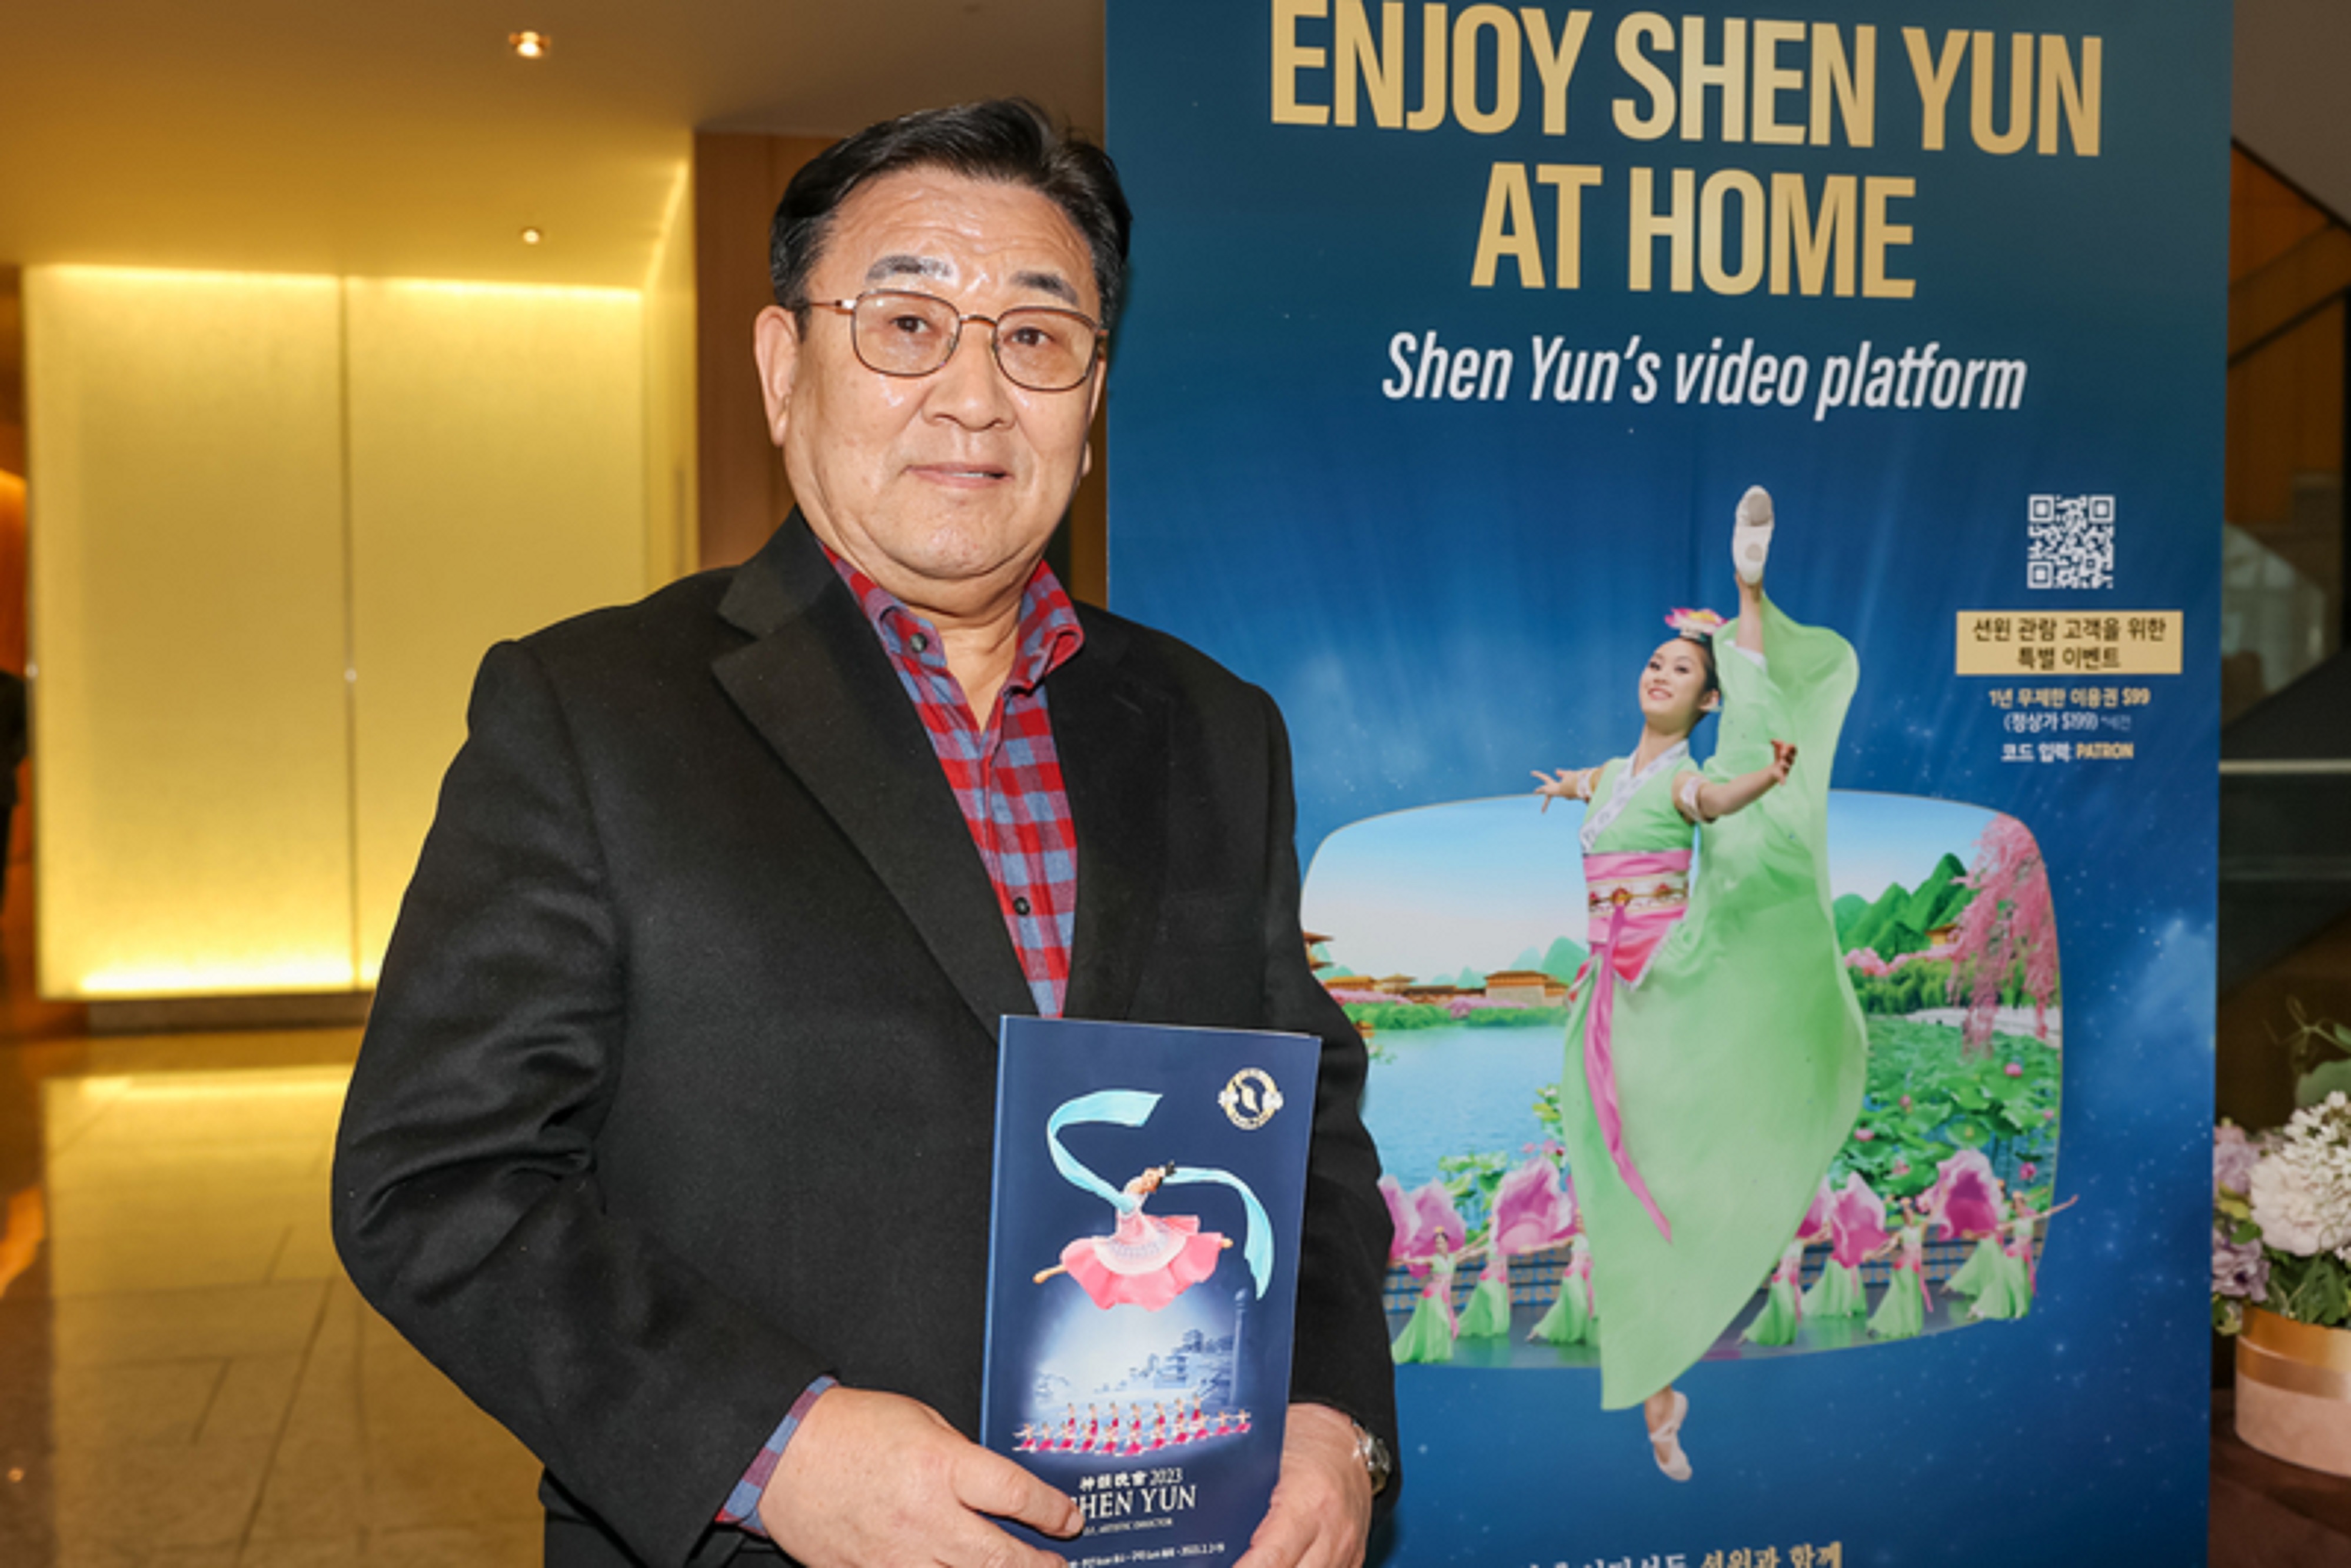 Watching Shen Yun, Korean Executive Says 'I Saw the Creator, and I Obtained Hope'